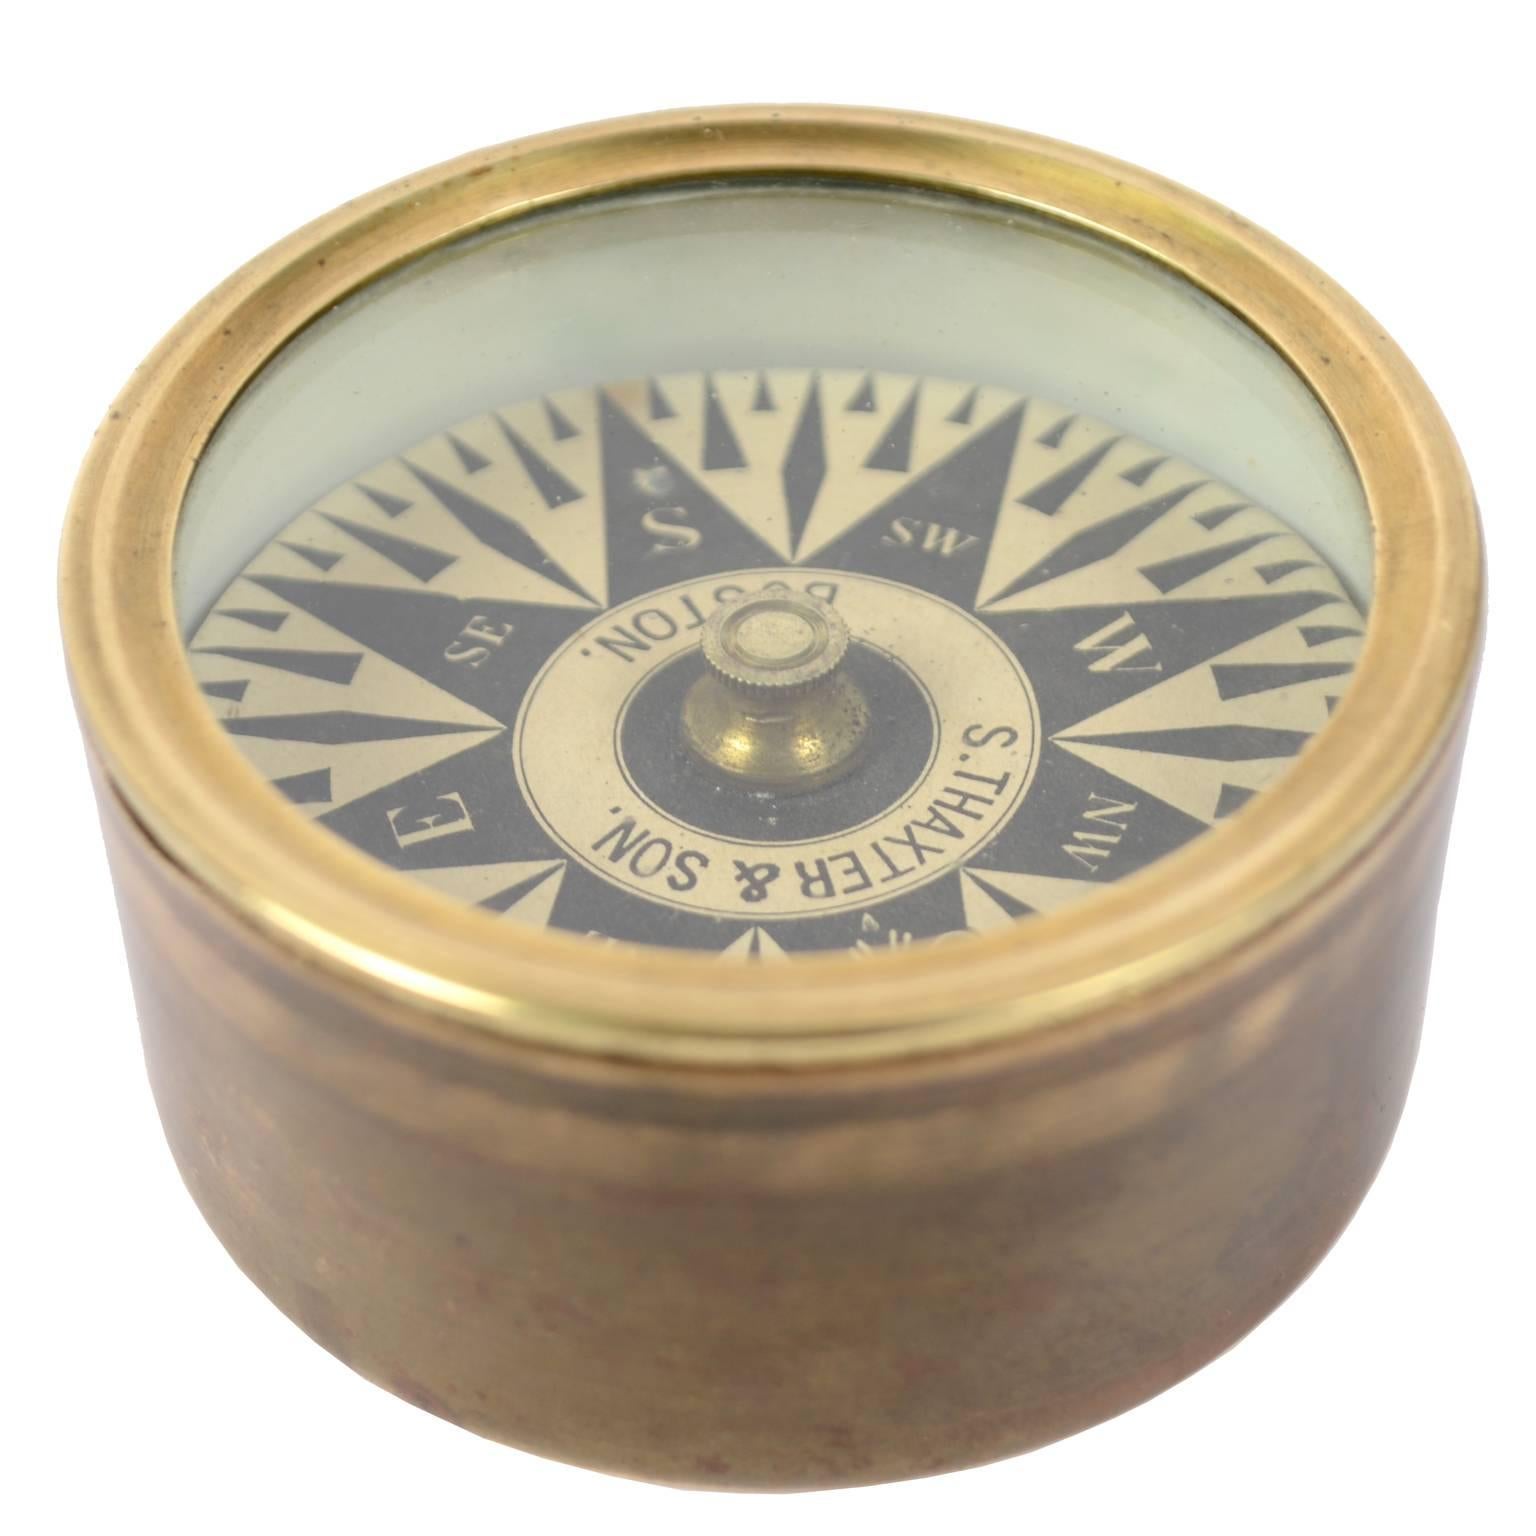 Dry compass placed in its original box of turned brass enclosed by a protective glass and complete with lid, signed S. Thaxter & Son Boston of the late 19th century. Eight-wind compass card printed on paper by engraving on copper plate, complete